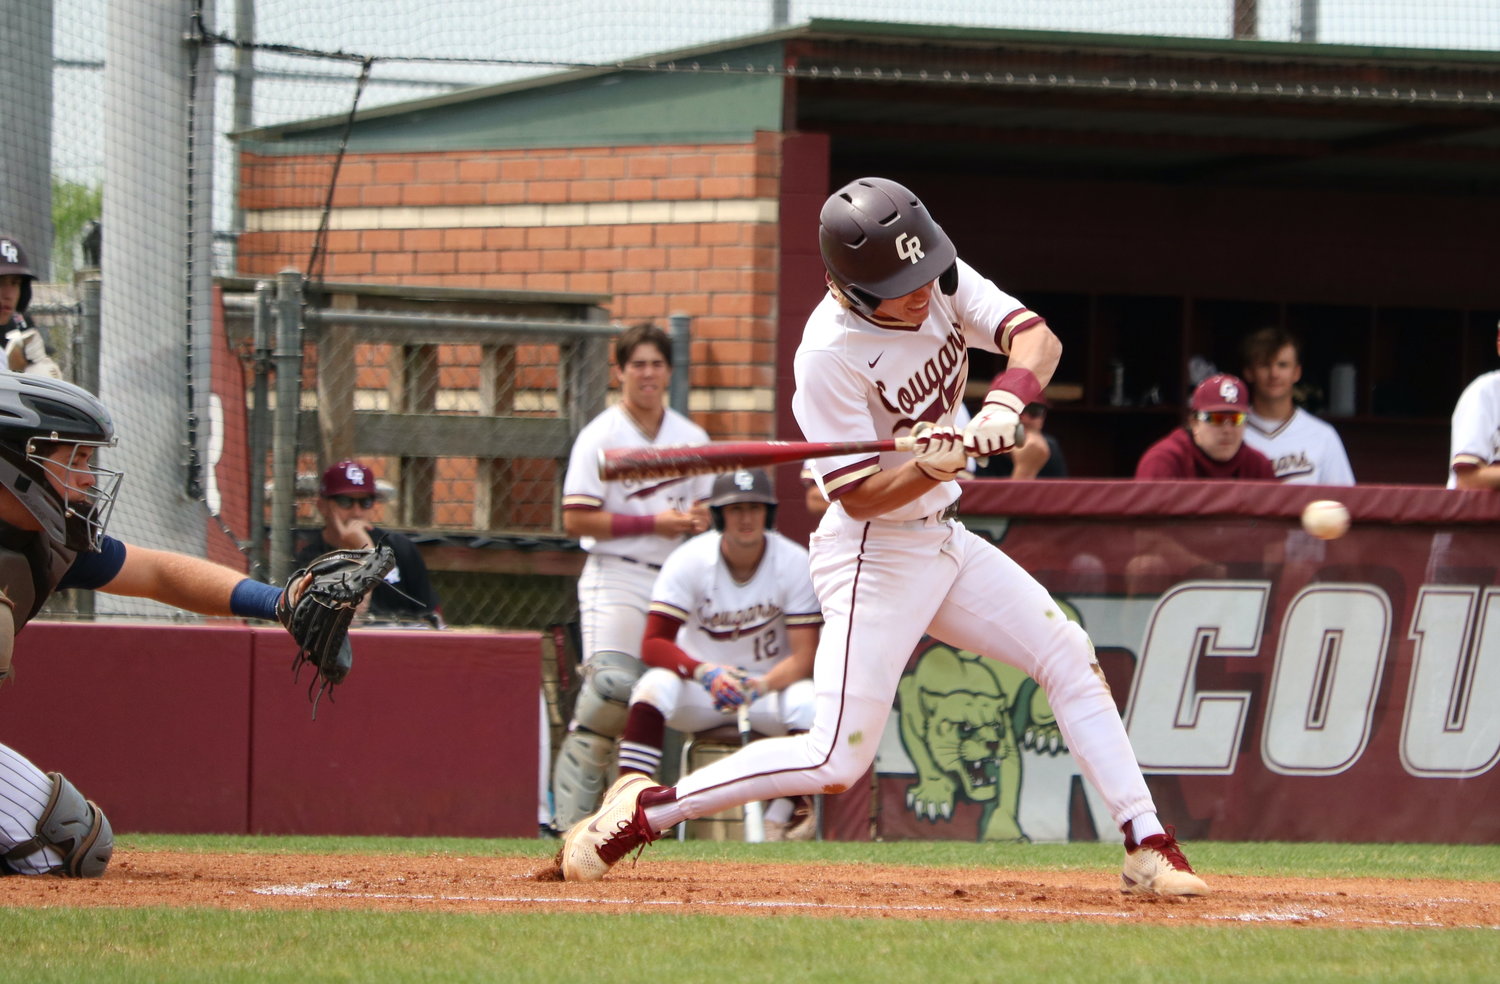 Brock DeYoung hits during Tuesday's game between Tompkins and Cinco Ranch at the Cinco Ranch baseball field.